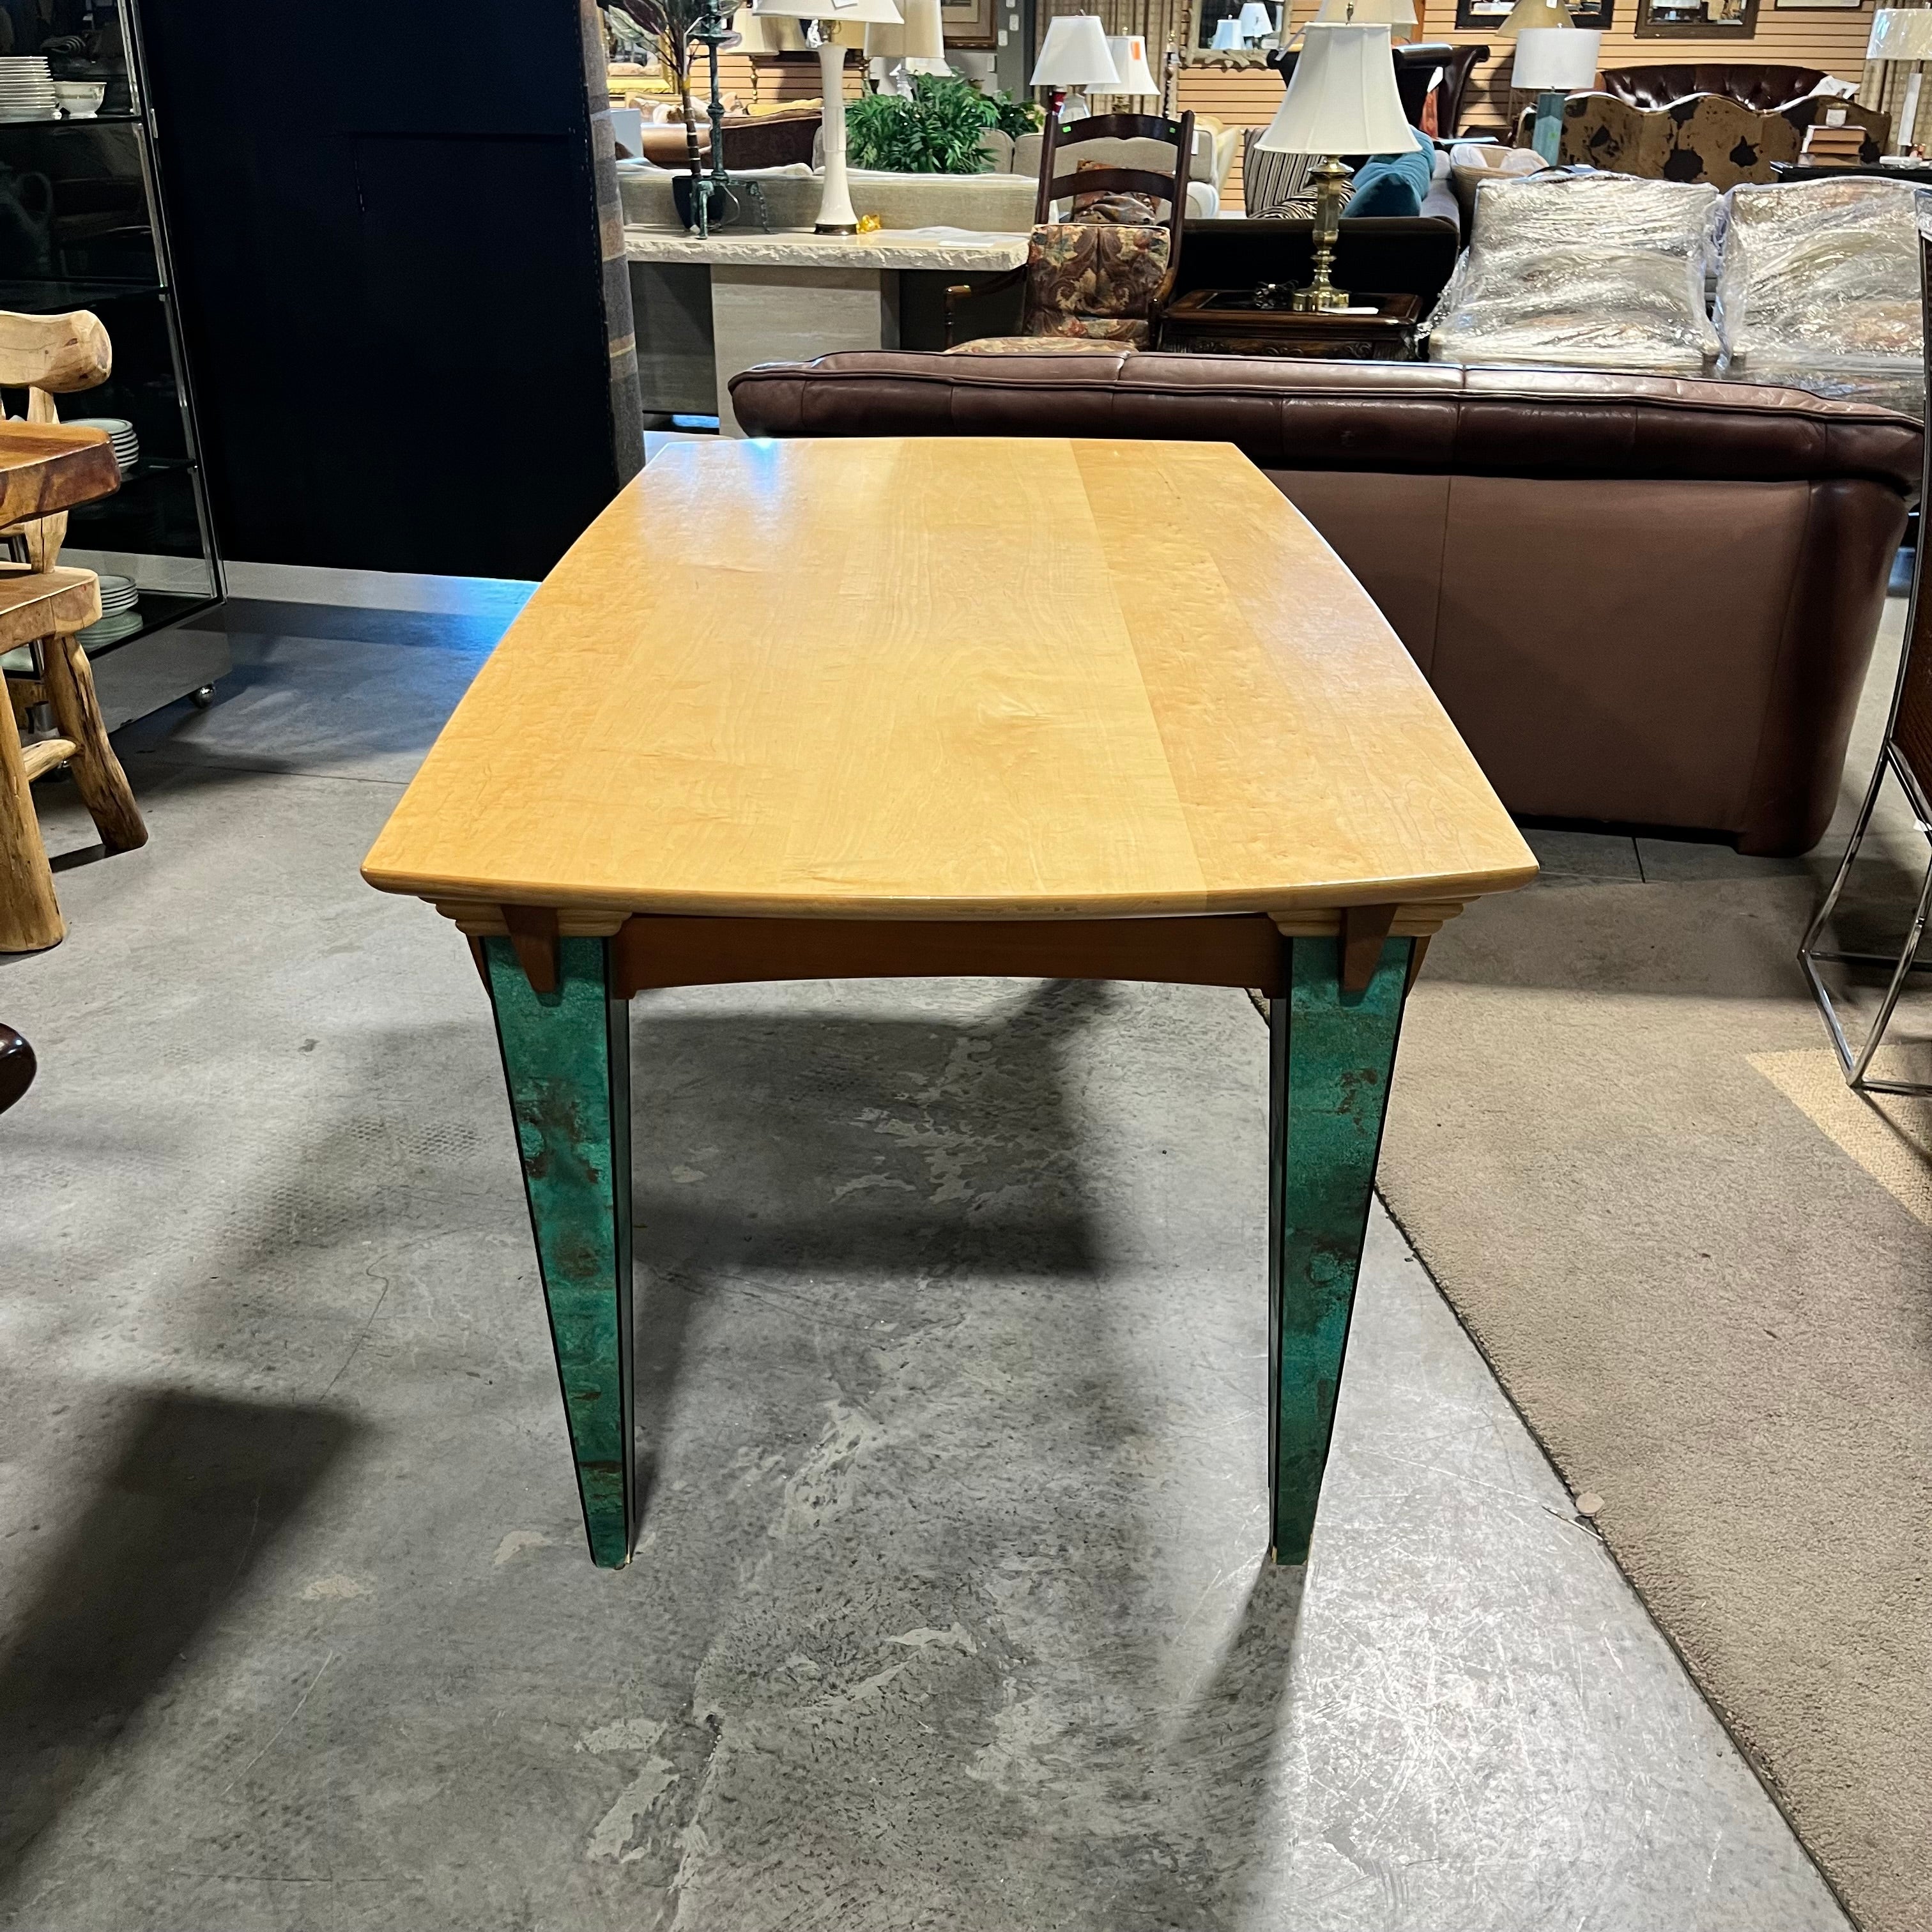 Maple Top with Green Legs Dining Table 72" x 36" x 29"